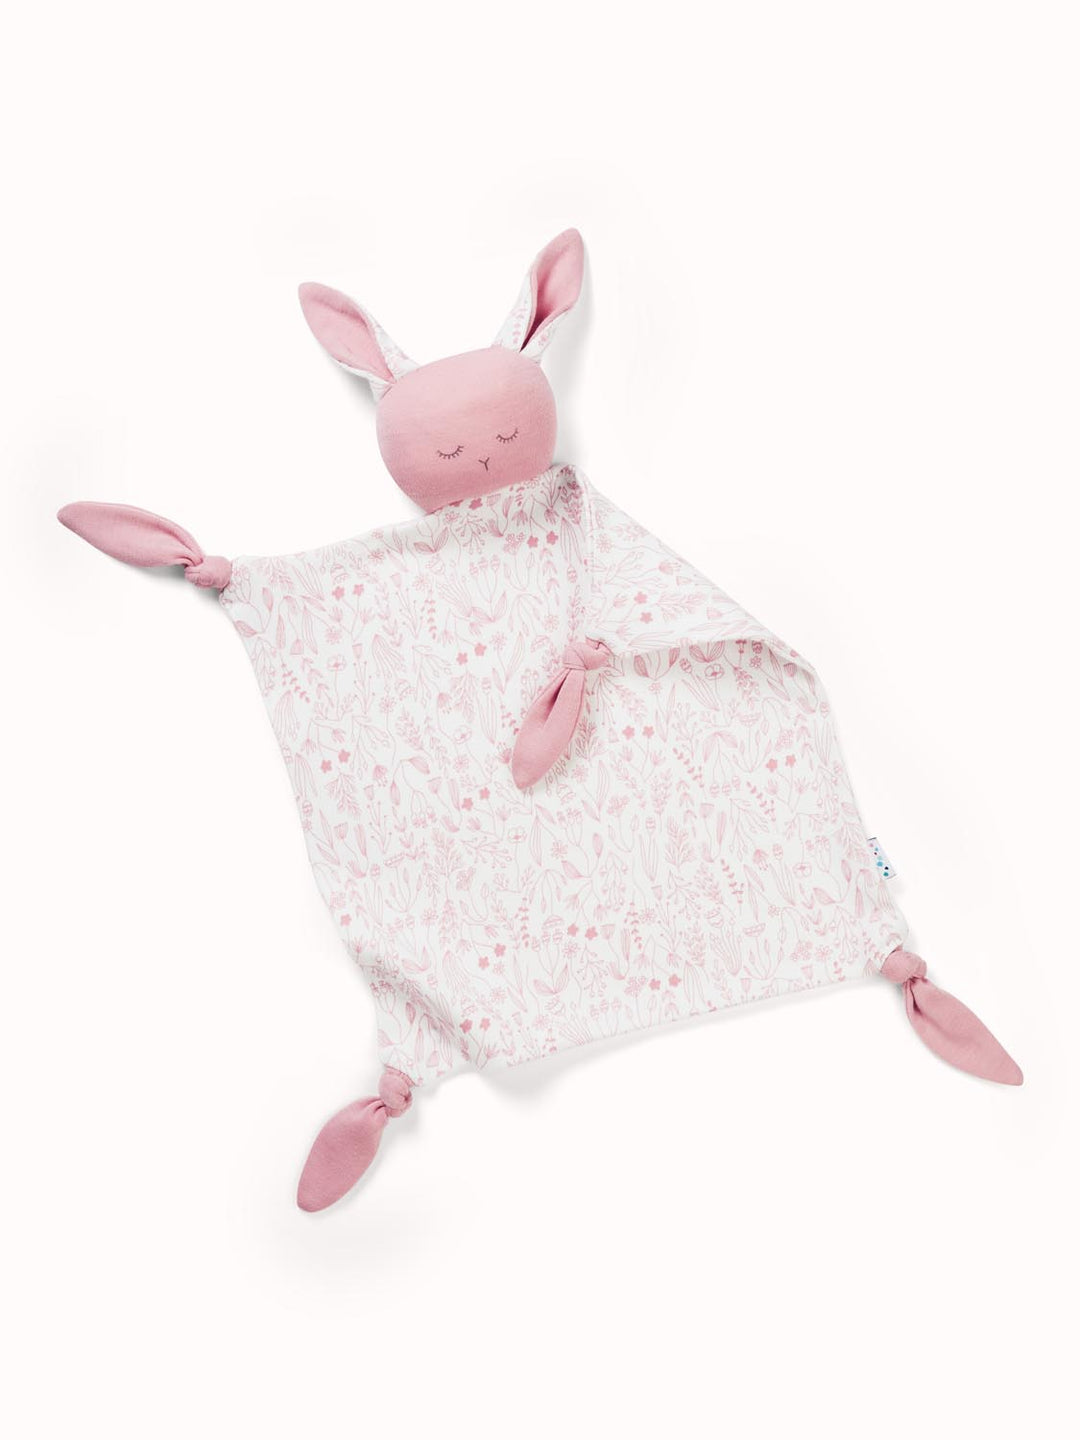 Imperfect Cuddle Bunny Comforter Imperfect Superlove Outlet Millefleur